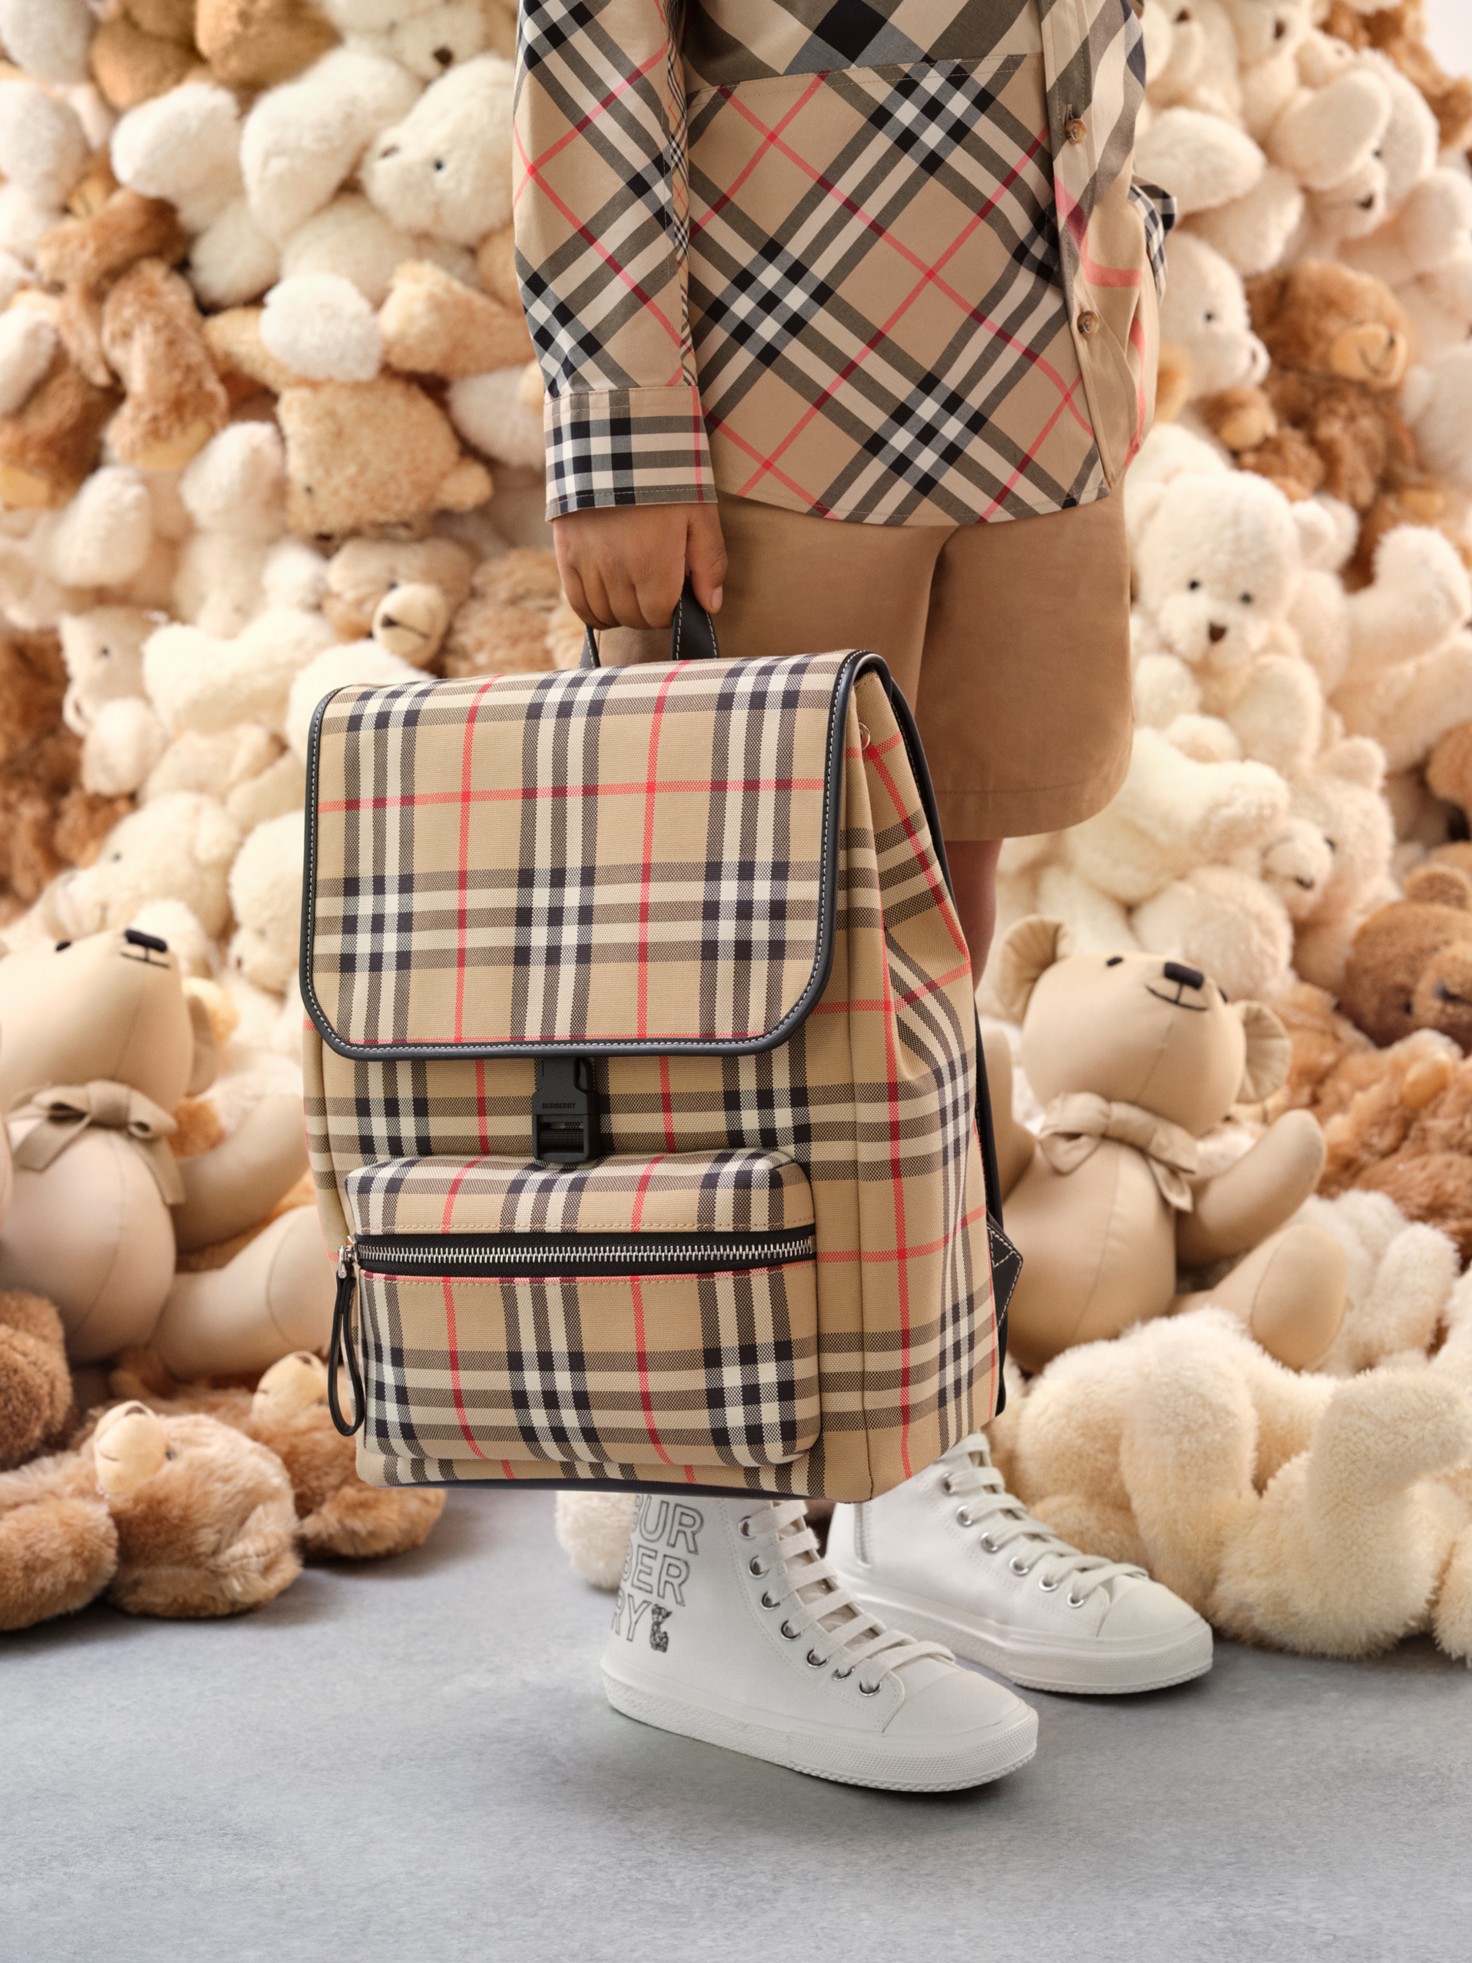 All Children's Accessories | Burberry® Official